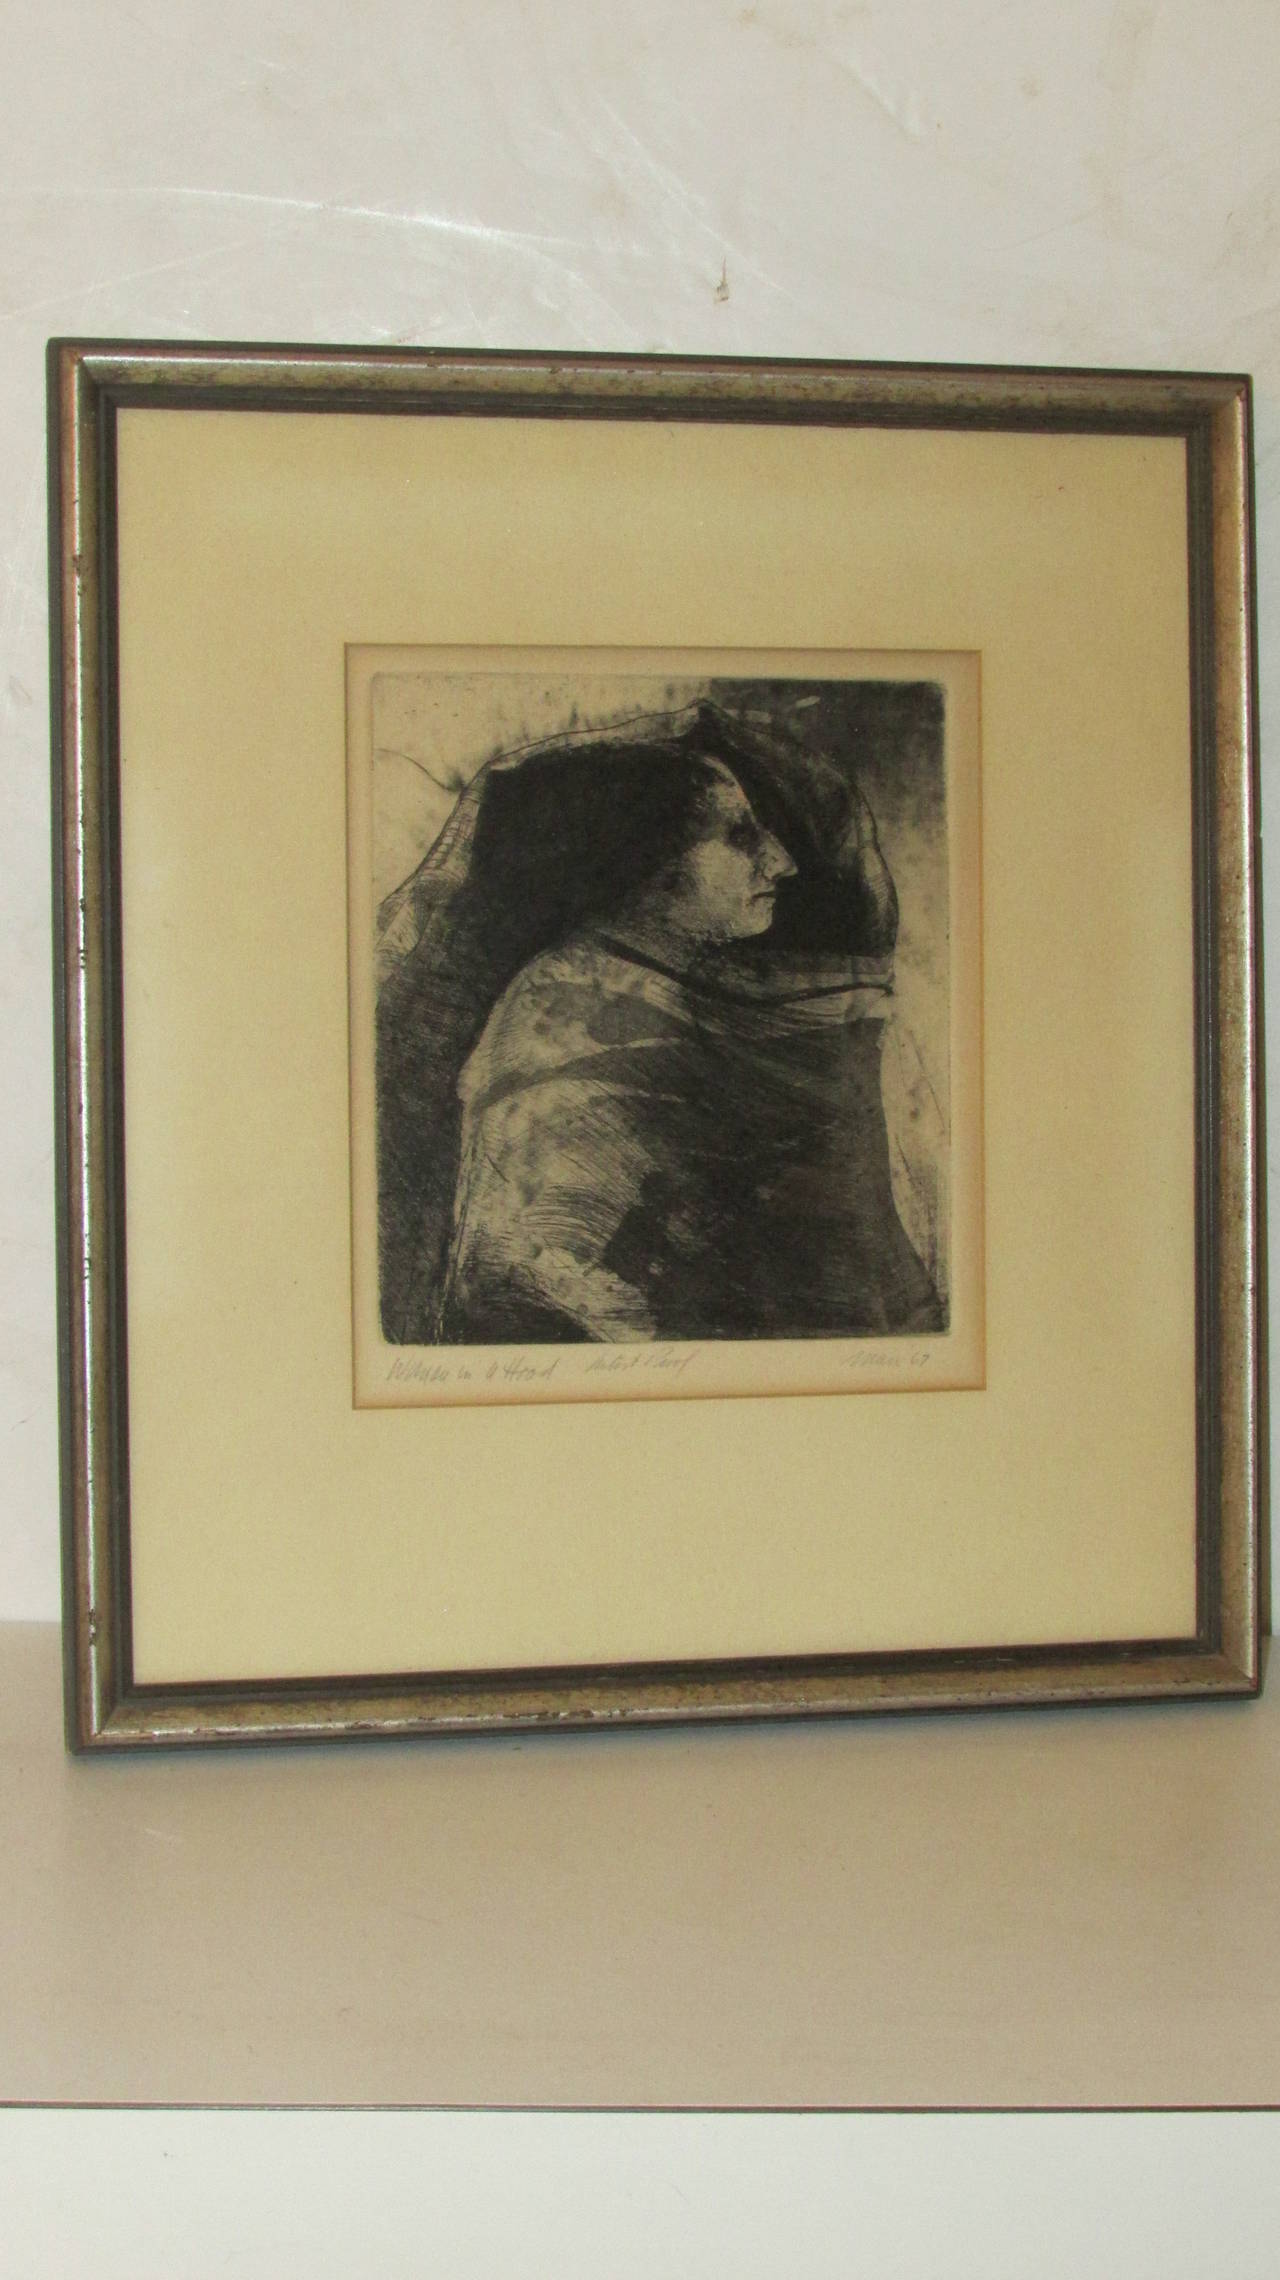 Pencil signed artist proof - titled - Woman in a Hood - 1967 by Robert Marx -  important American figurative & social protest artist associated along with the likes of Leonard Baskin & Leon Golub. Matted in silver gilded wood frame under glass.